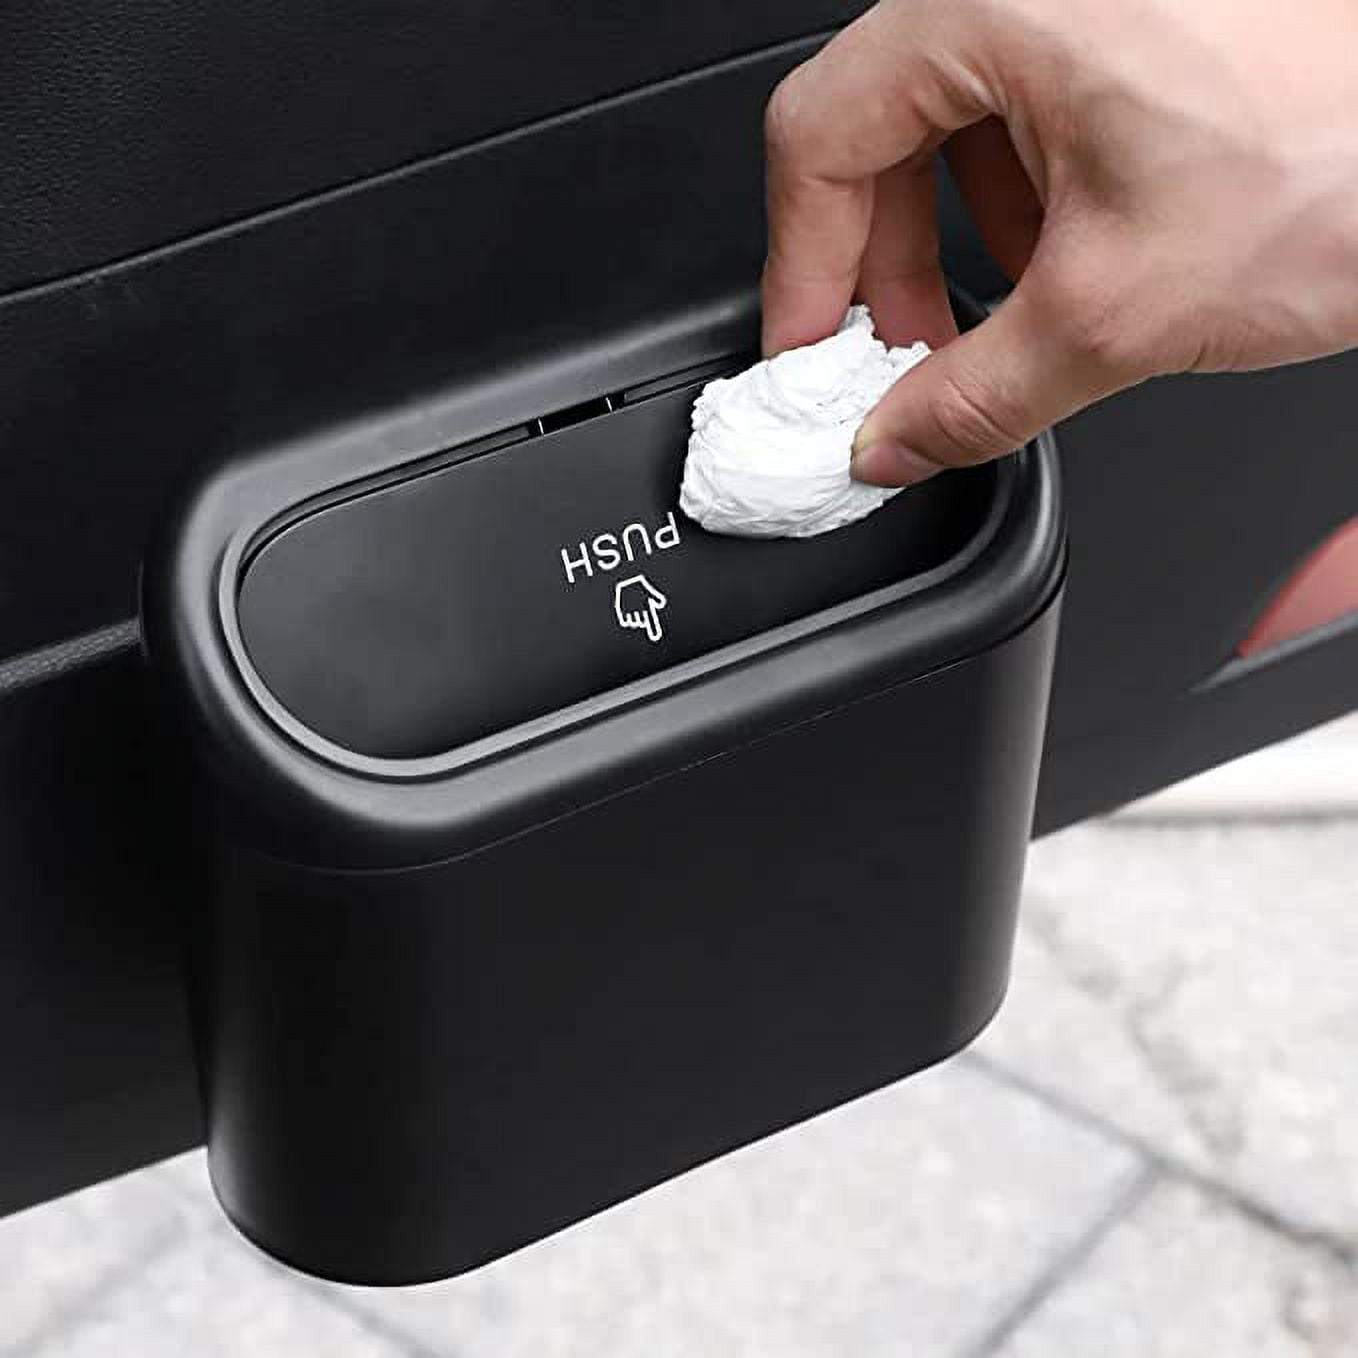 TinLeJa Car Trash Can with Lid, Mini Leakproof Car Garbage Can Bin Vehicle  Trash Dustbin Bin Garbage Organizer for Auto Cars, Home, Office, Black